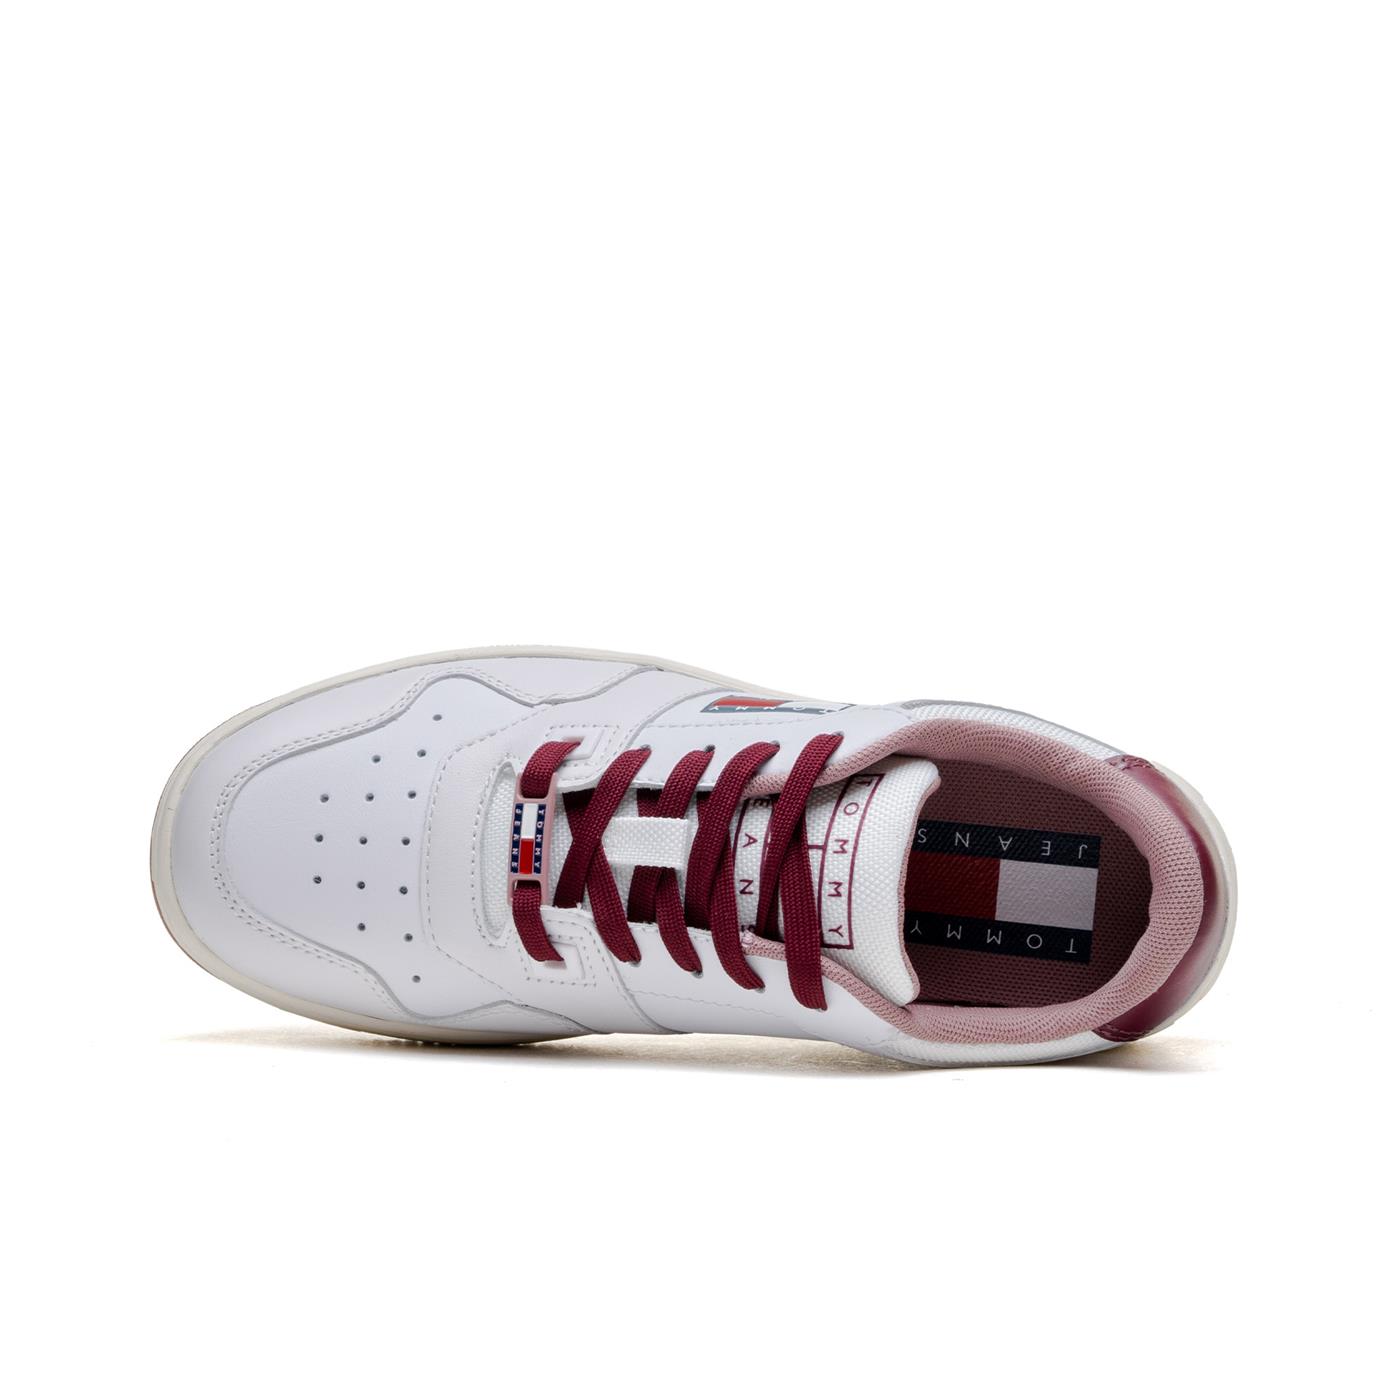 Retro Leather Constrast Detail Basket Trainers